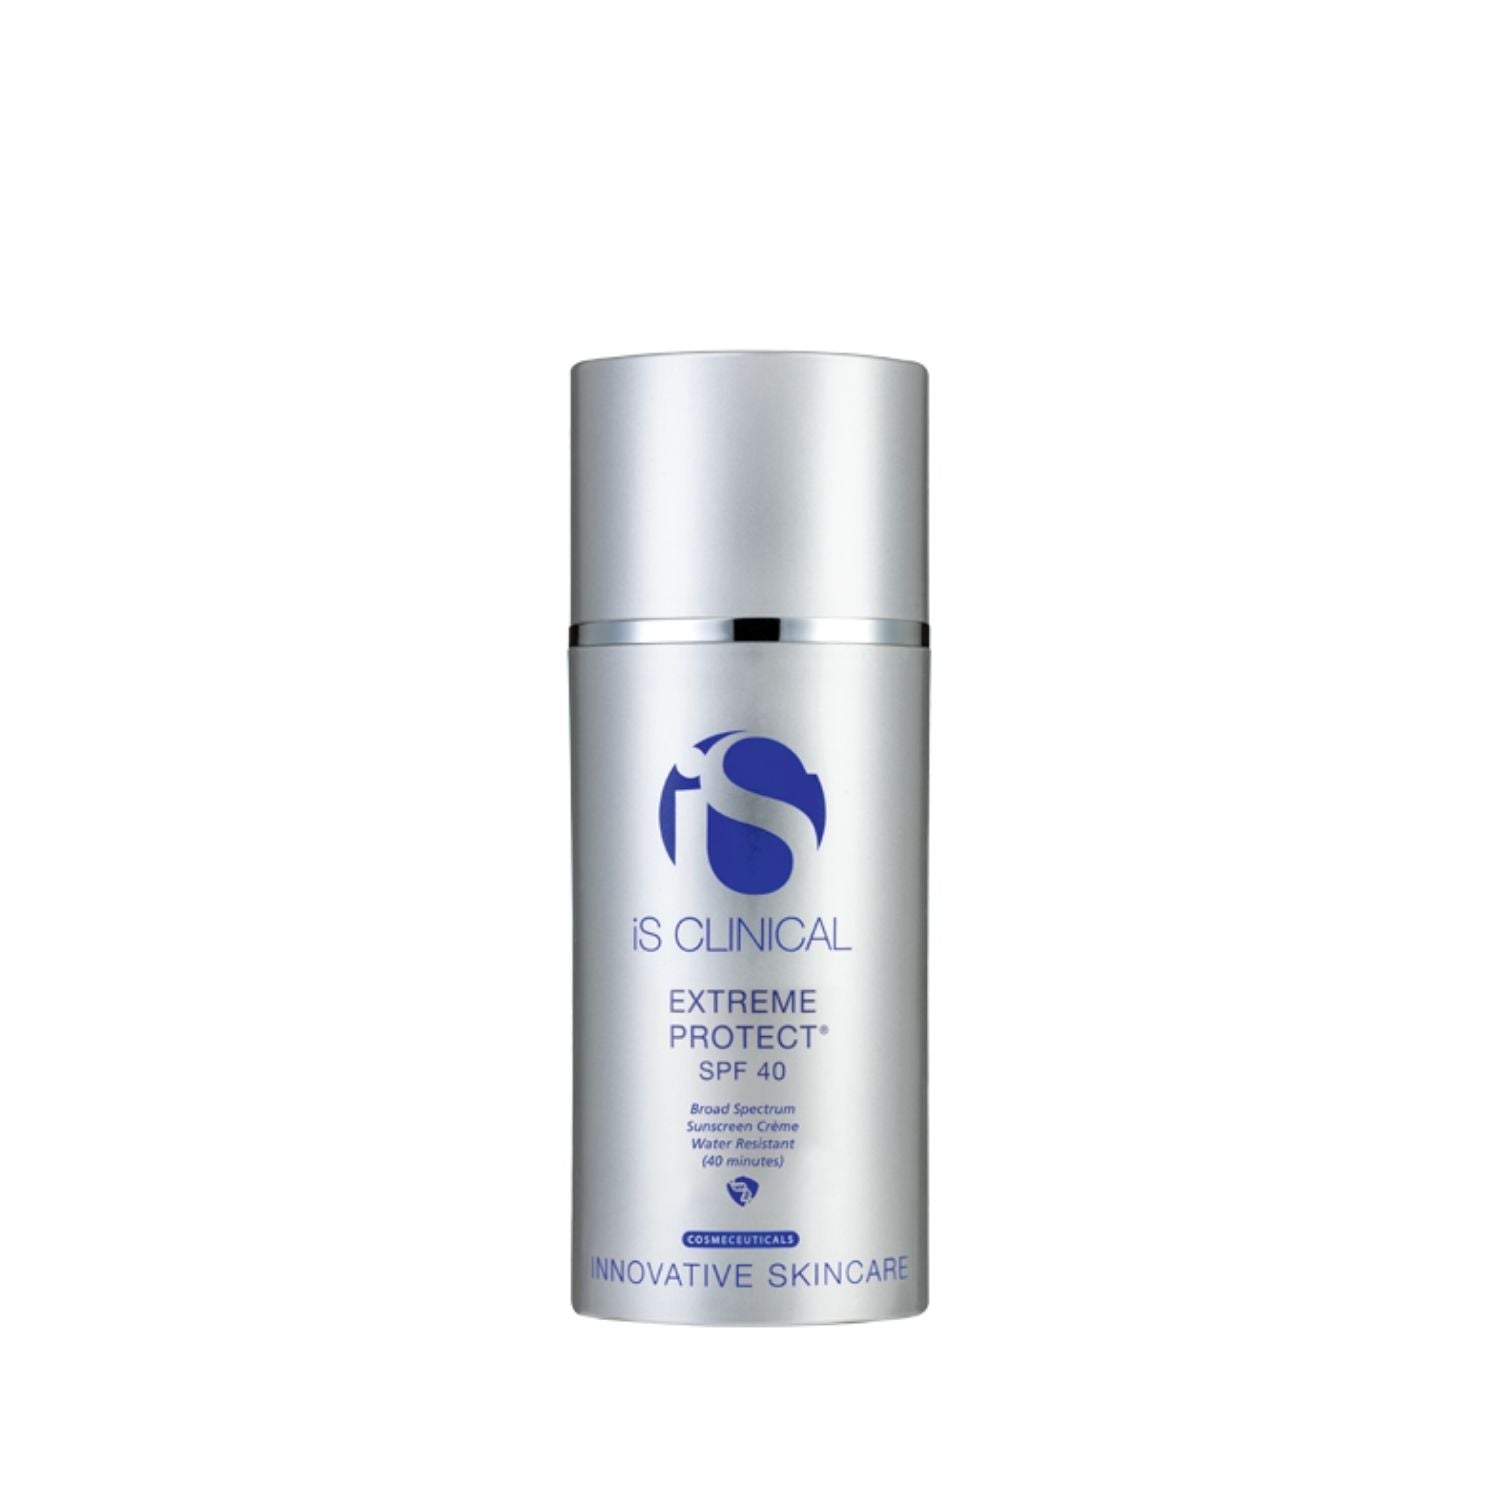 iS Clinical Extreme Protect SPF 40 - Dr. Pen Store - iS Clinical Buy Genuine Dr Pen Products with Trust